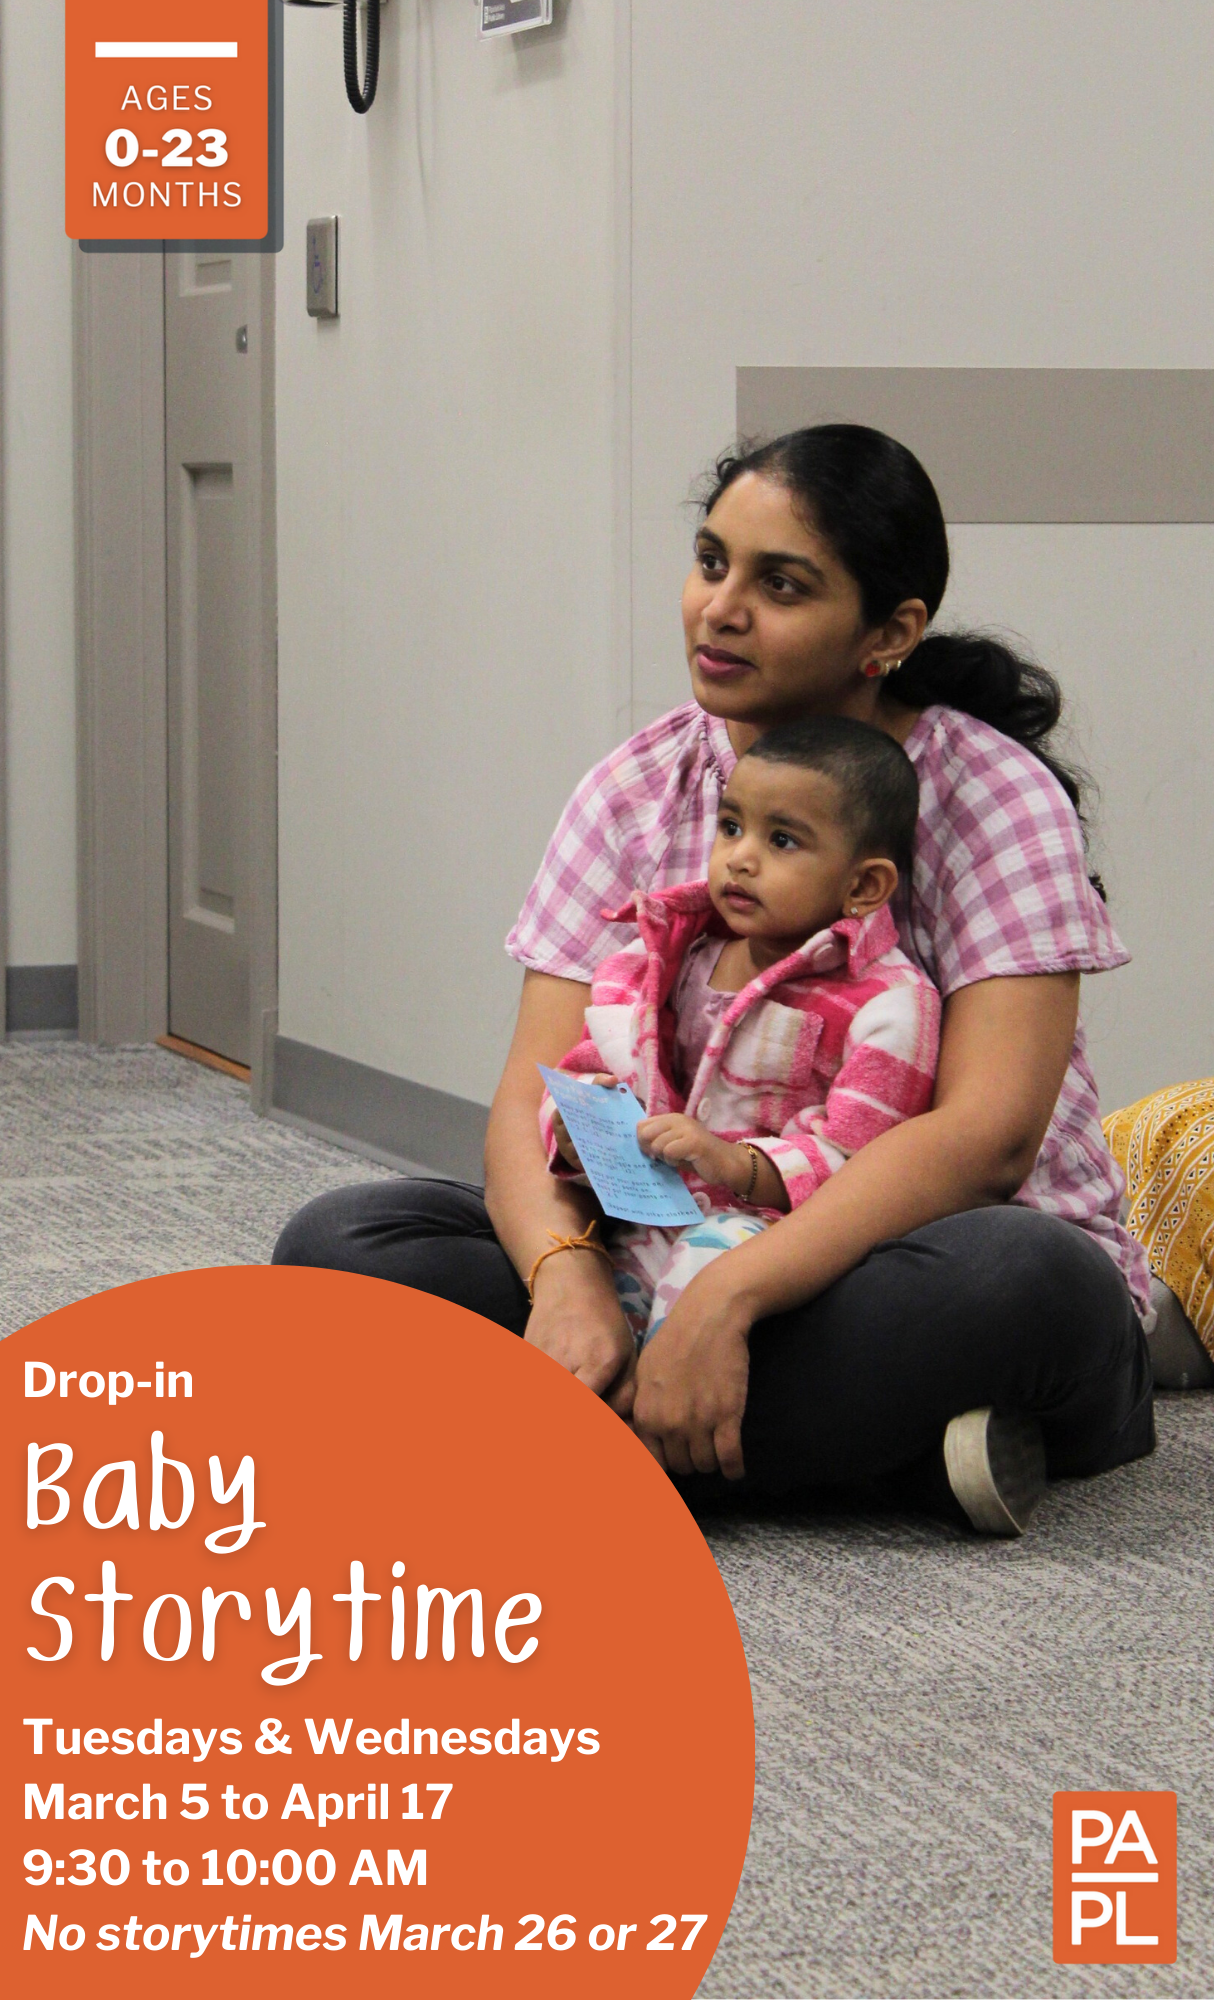 Drop-in Baby Storytime